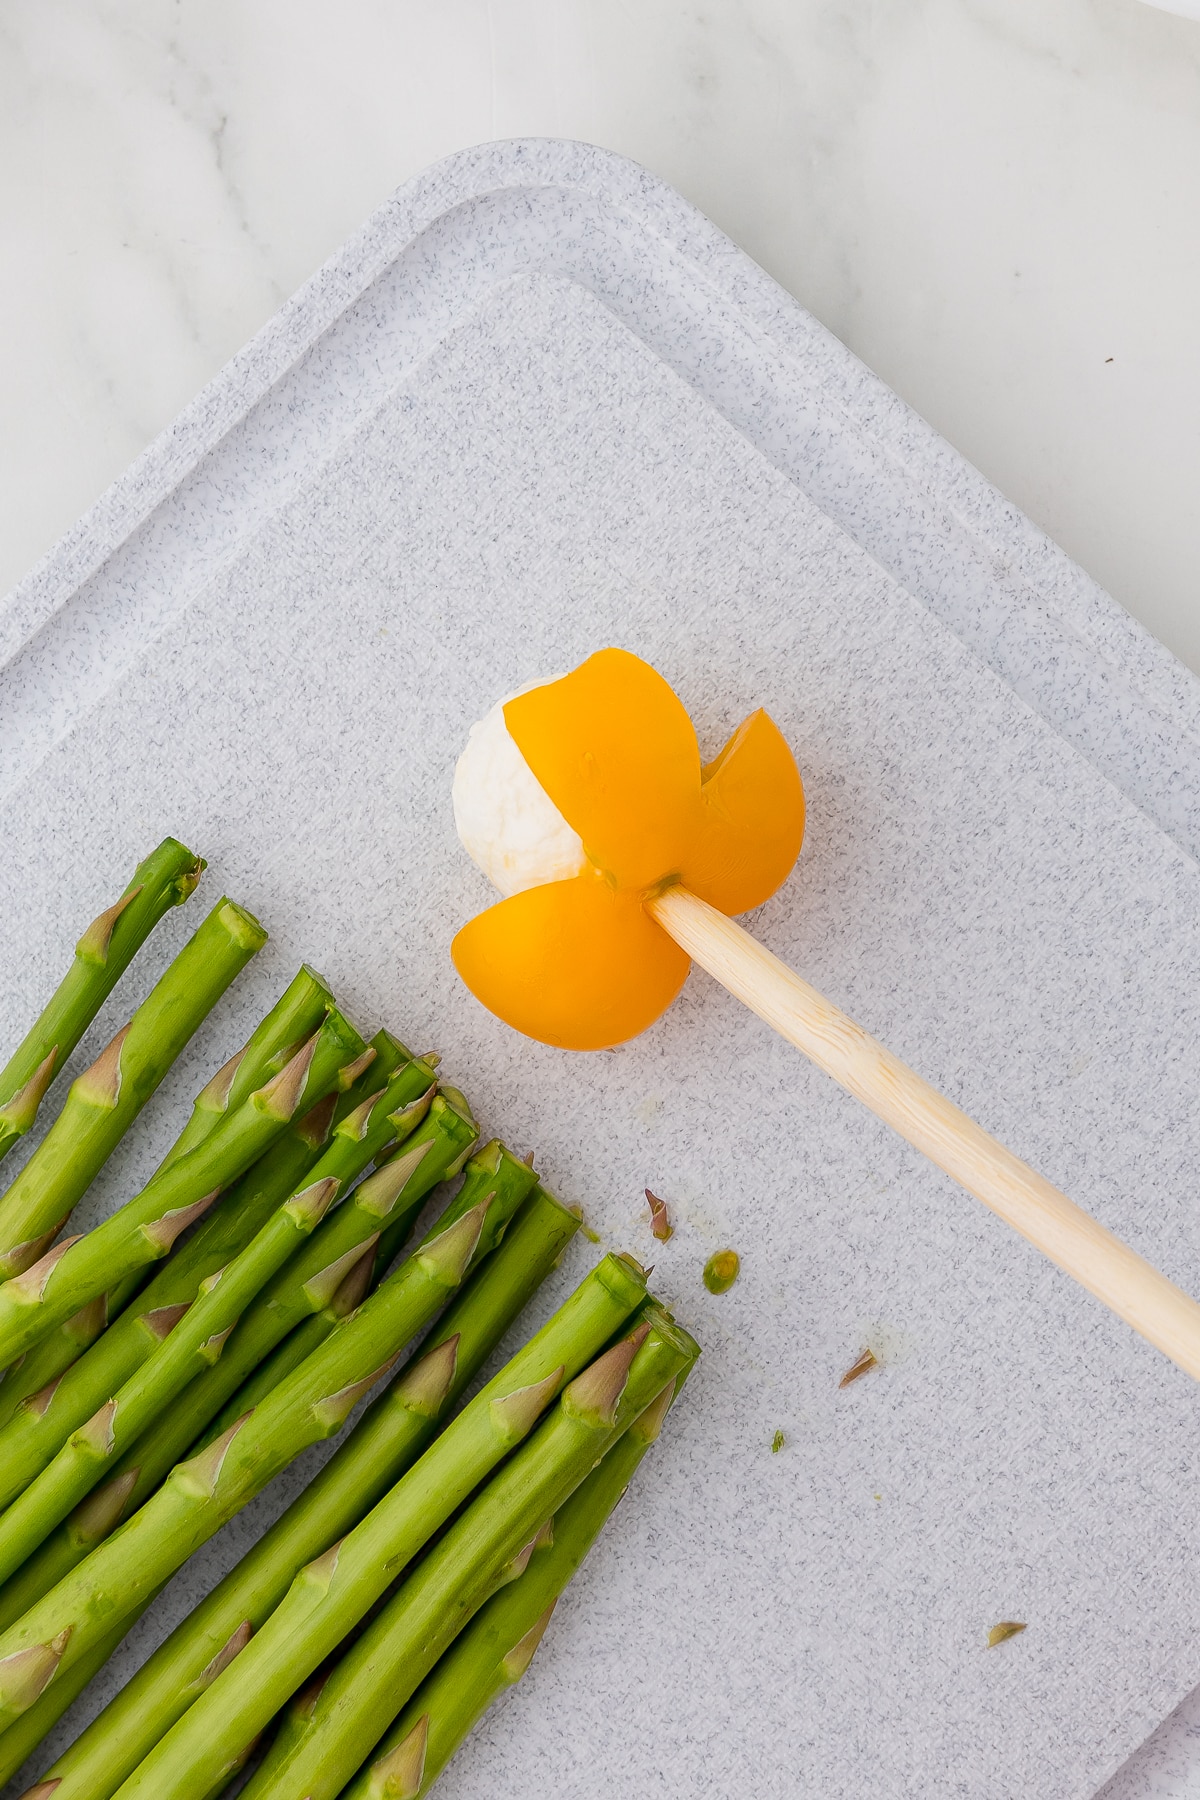 asparagus spears on a cutting board, a skewer piercing the bottom of a yellow cherry tomato